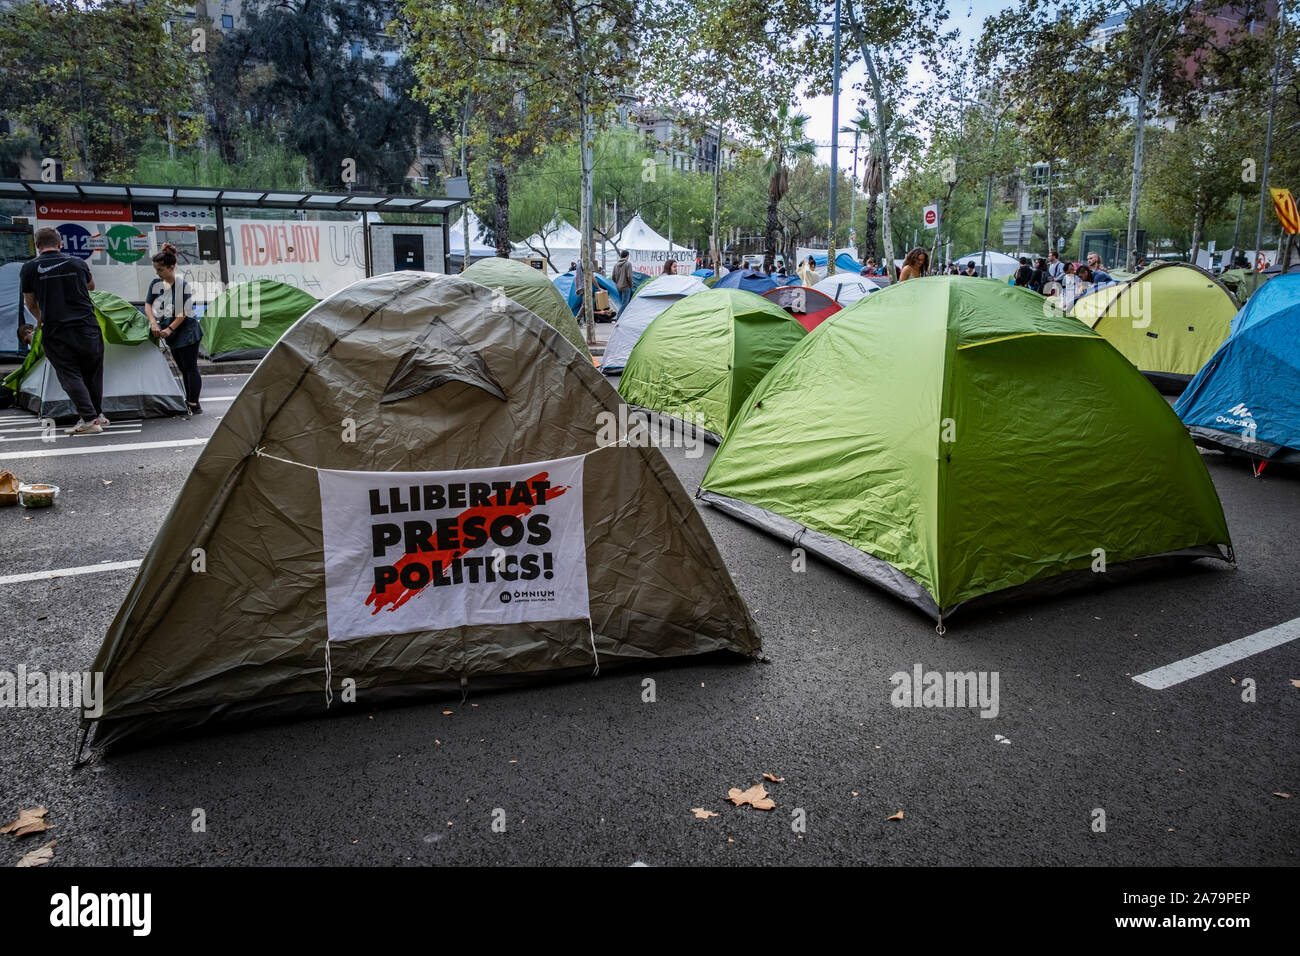 Barcelona, Spain. 31st Oct, 2019. Several tents during the university  protest camp.Hundreds of university students spent a night camping at the  Pl. University in front of the Central University protesting over the